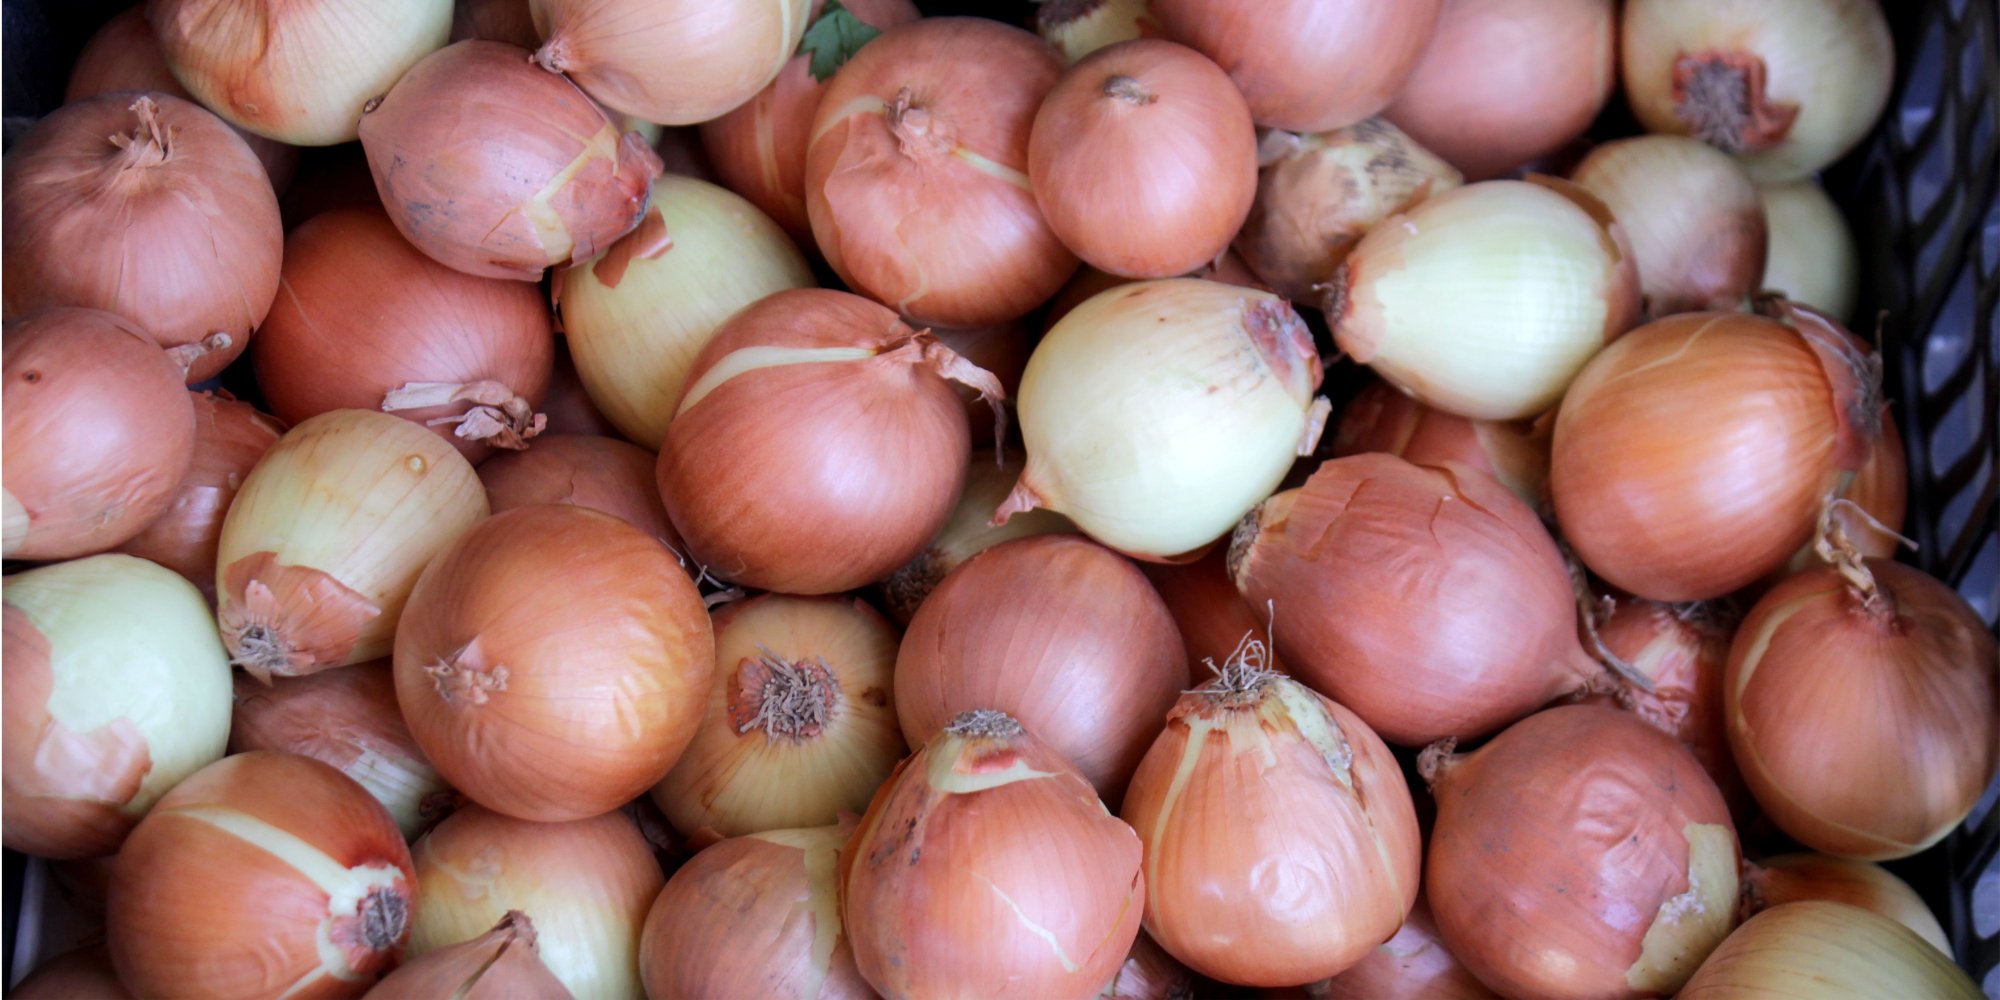 A photograph of a bushel of onions in Bari, Italy.